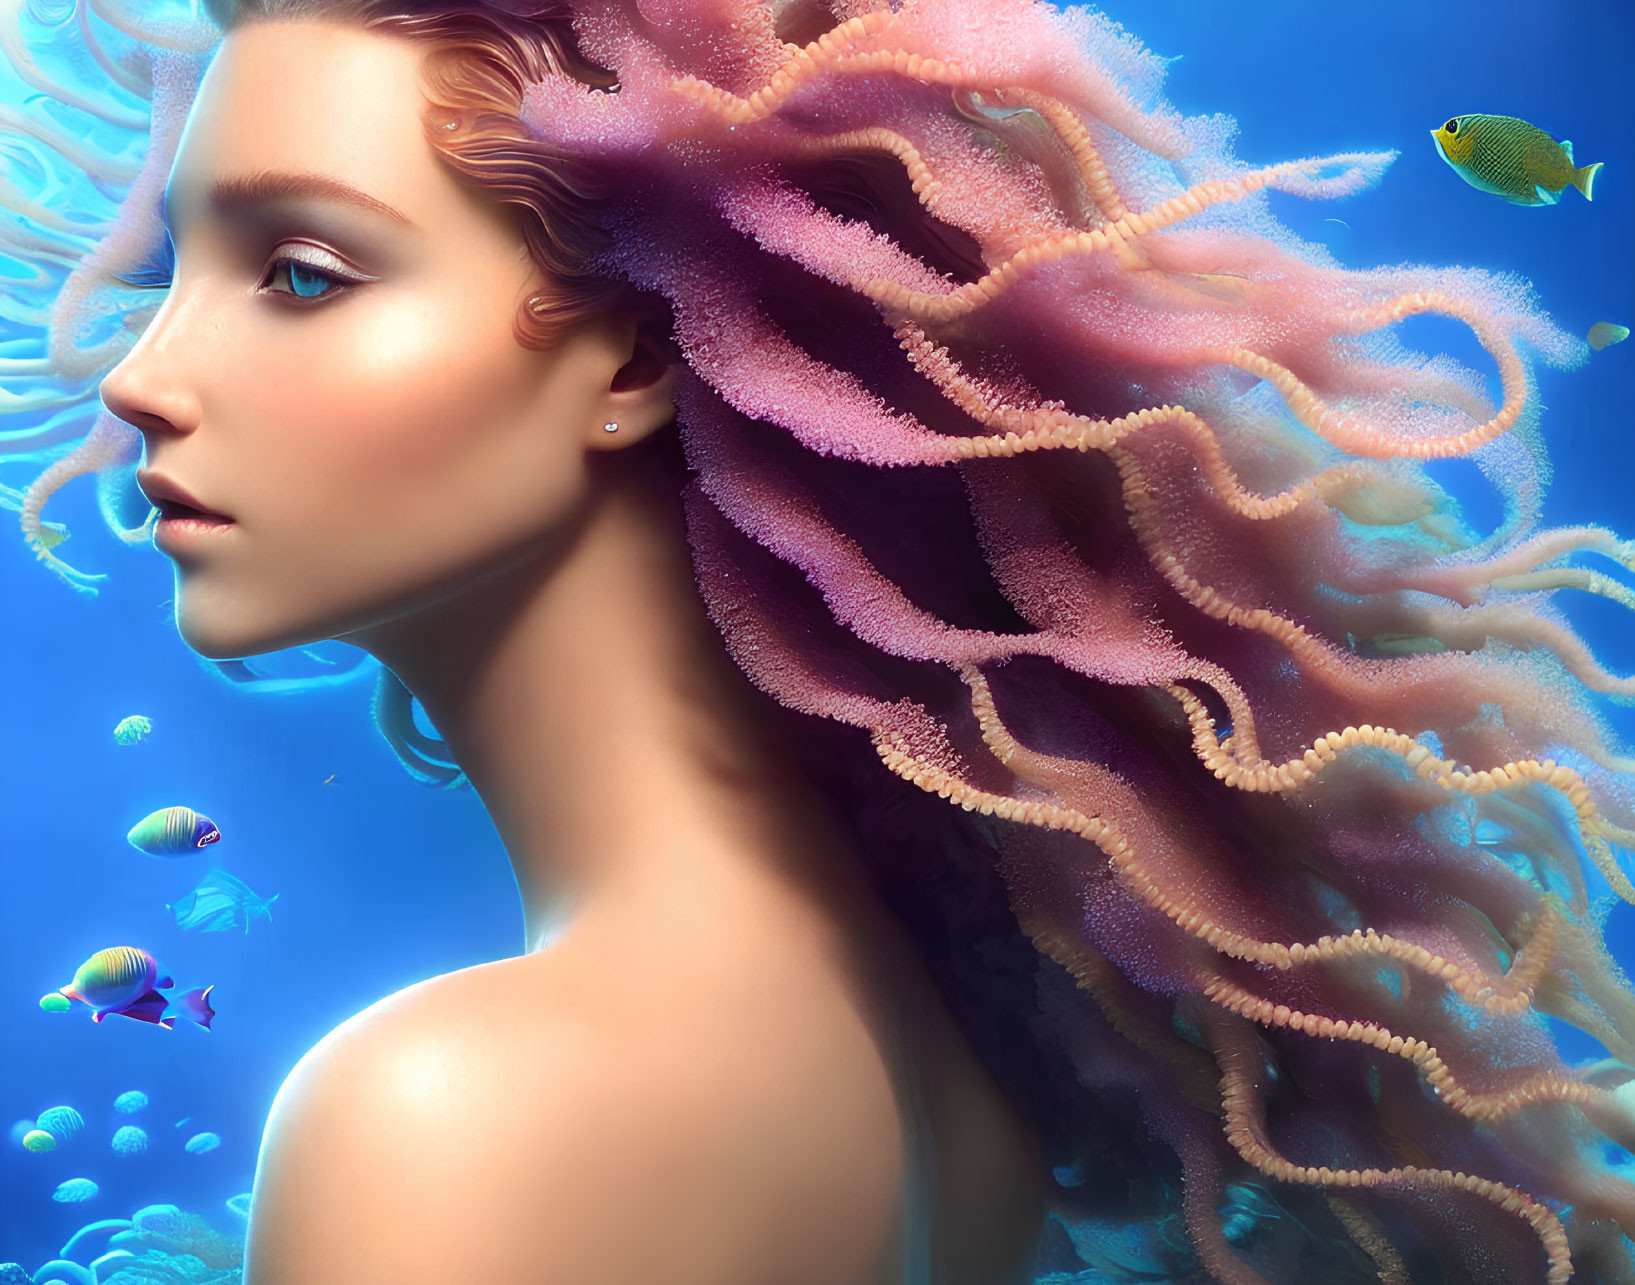 Vibrant surreal portrait: woman with pink jellyfish-like hair underwater